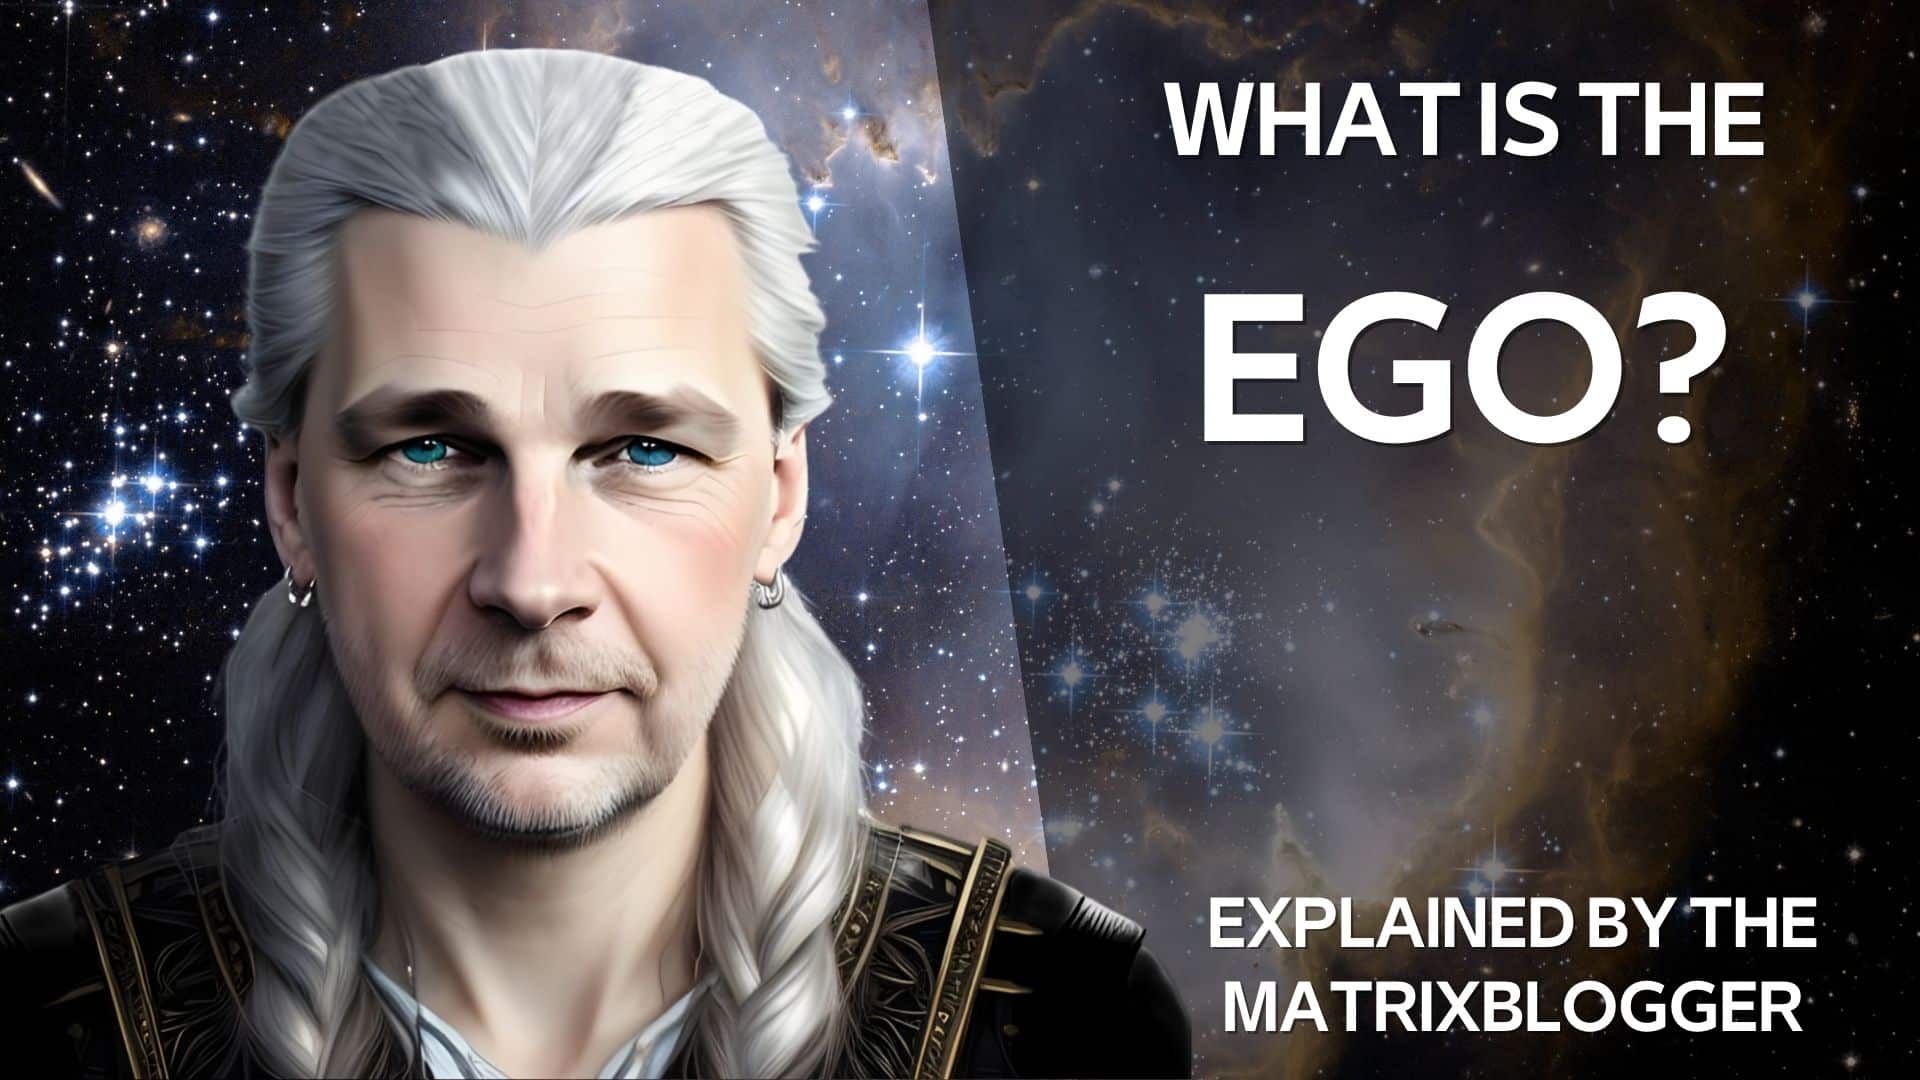 What is the Ego?